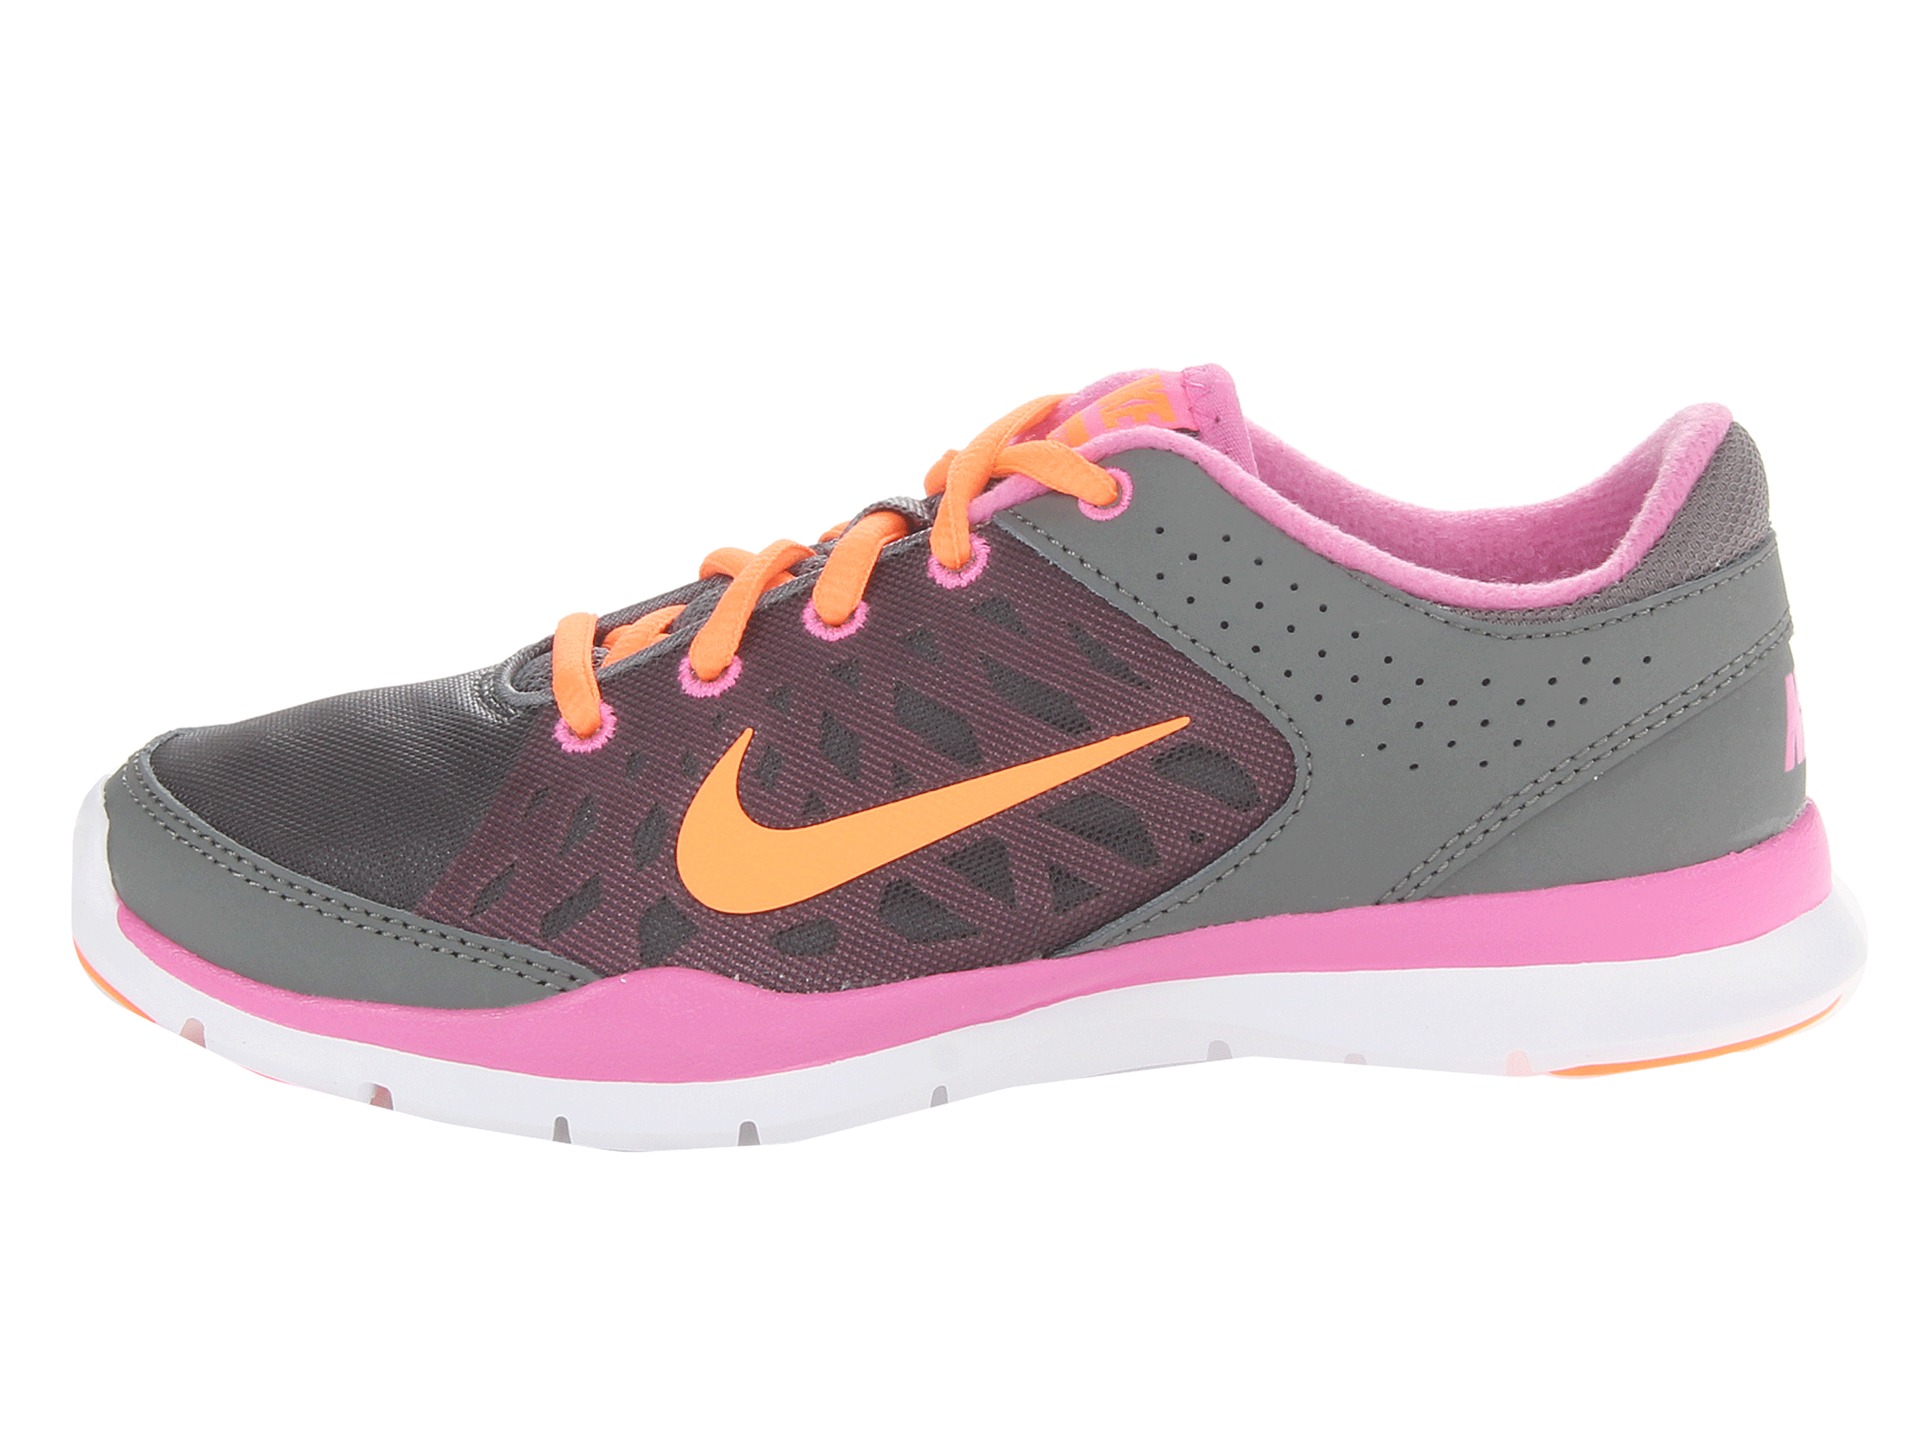 Nike Flex Trainer 3 | Shipped Free at Zappos